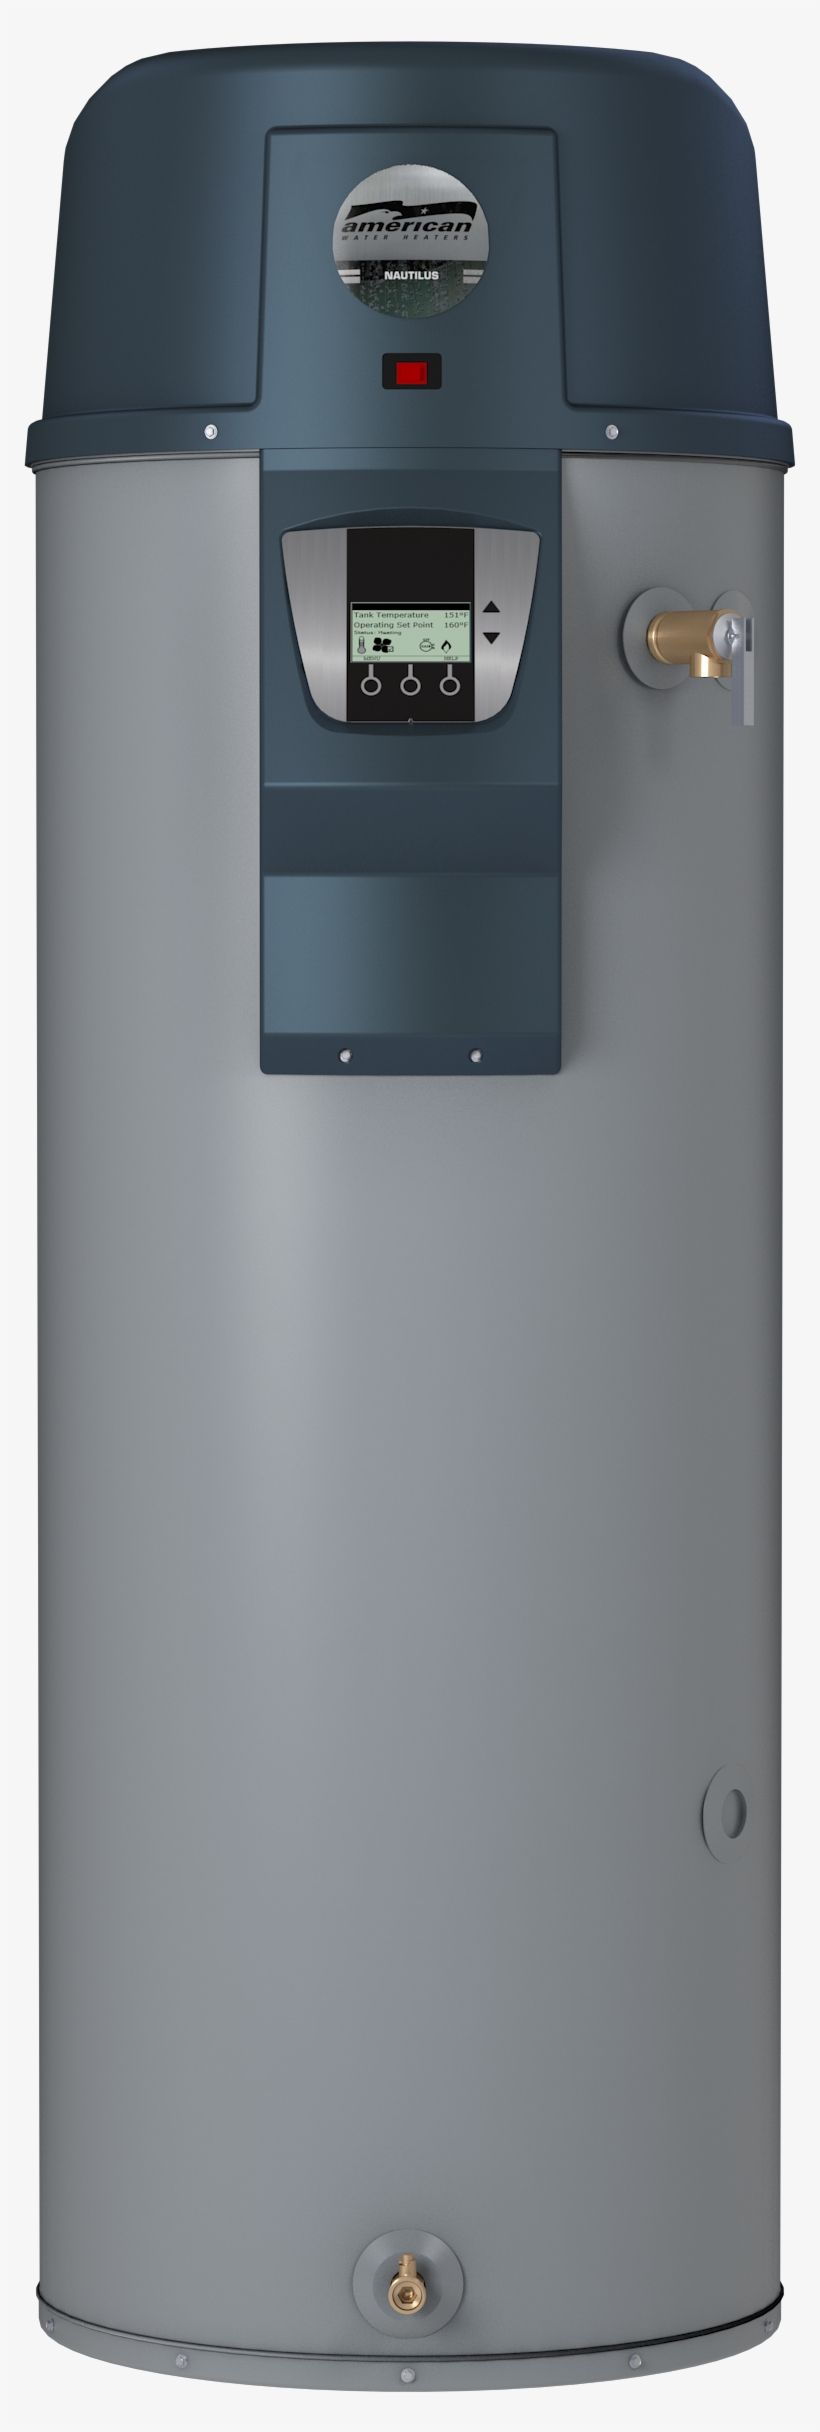 Png - American Hot Water Heater, transparent png #2329989